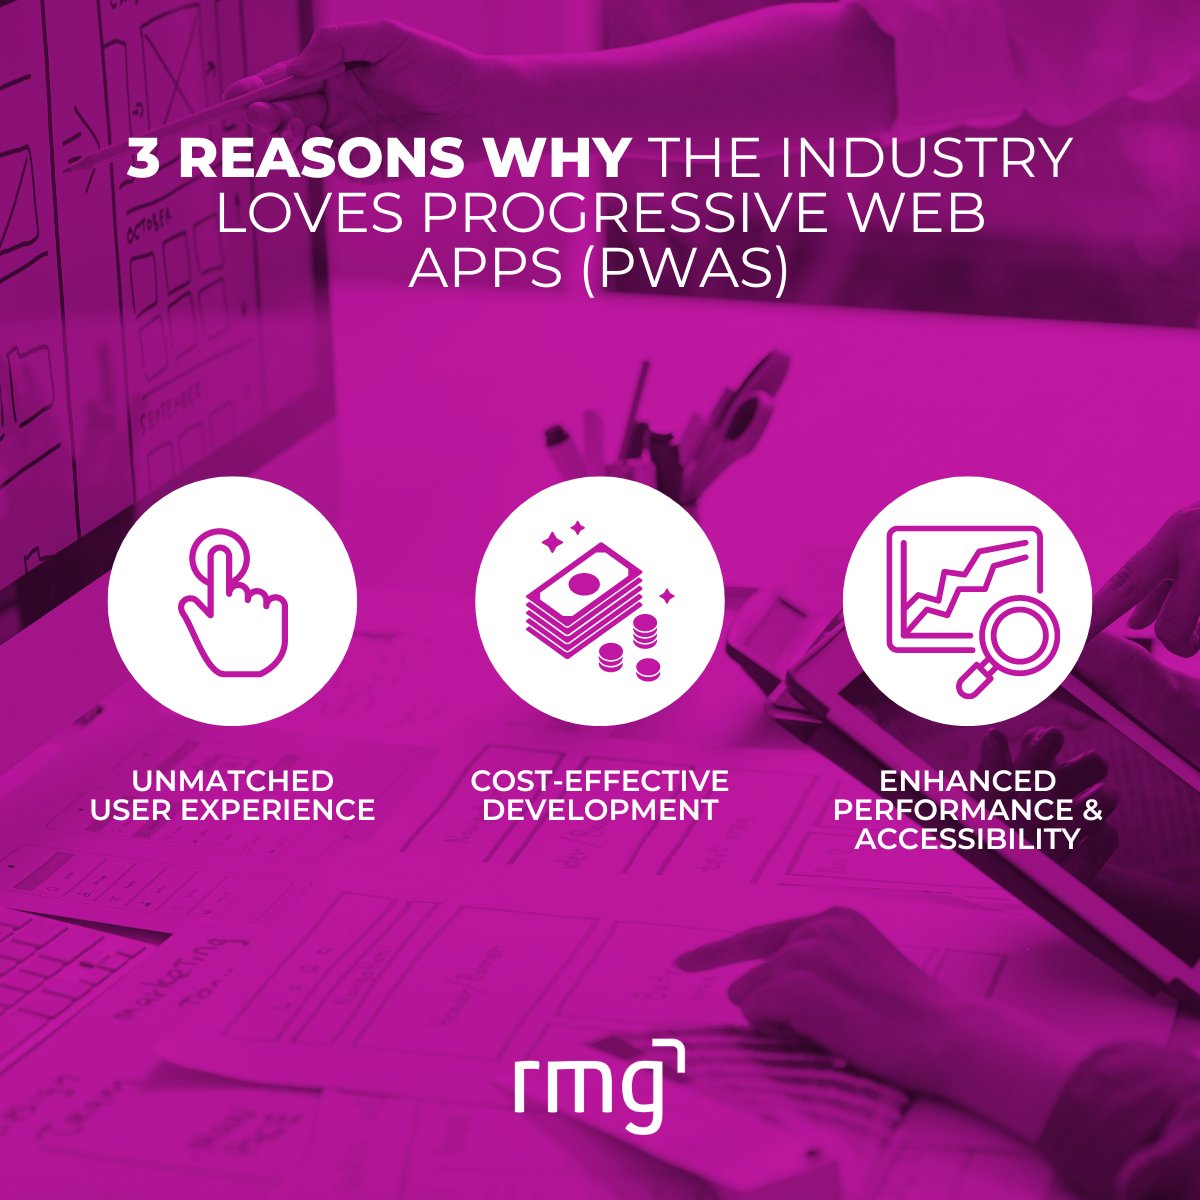 🚀 3 Reasons Why the Industry Loves Progressive Web Apps (PWAs) 🌐
Want to ensure your digital offerings stand out? RMG Digital can connect you with the talent to bring Progressive Web Apps to life in your business. #ProgressiveWebApps #WebDevelopment #RMGDigital